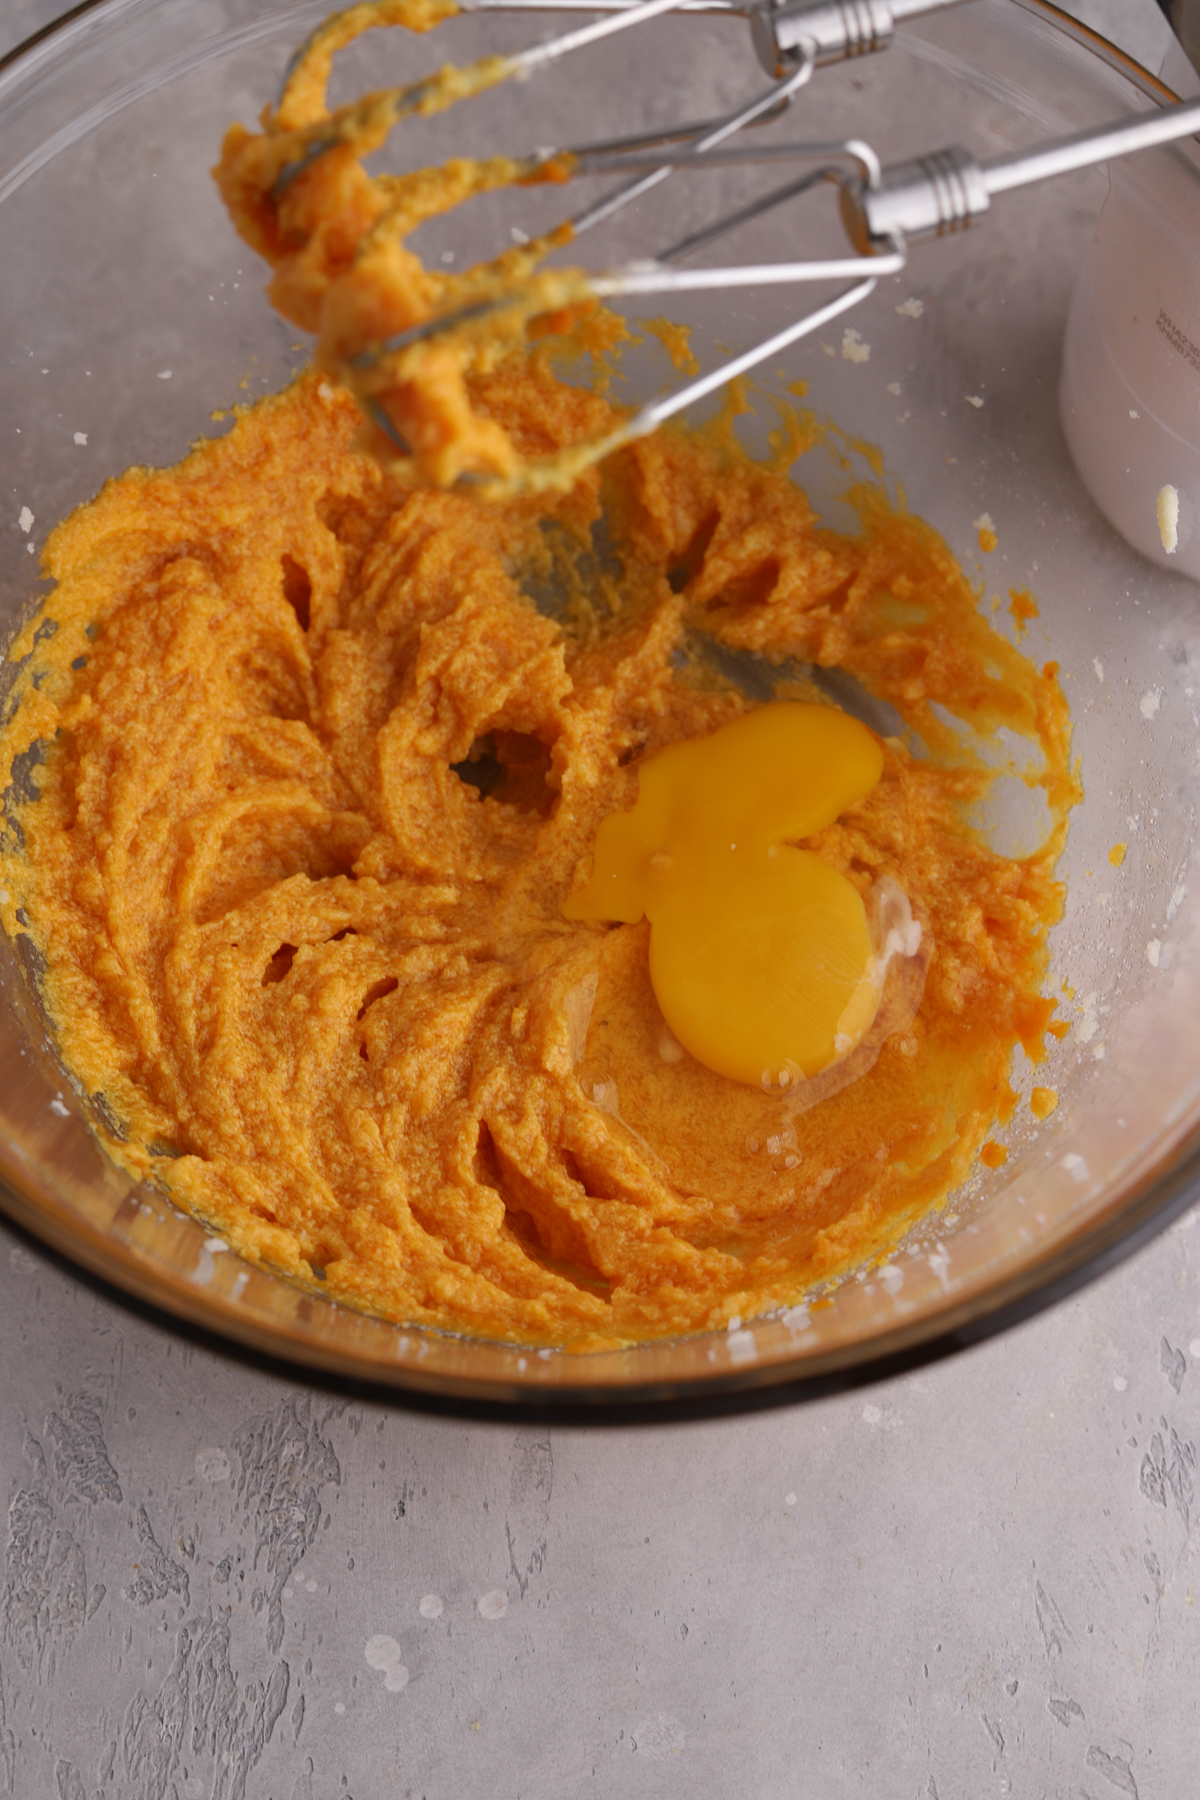 Orange pumpkin cookie dough and an egg on top in a glass bowl.